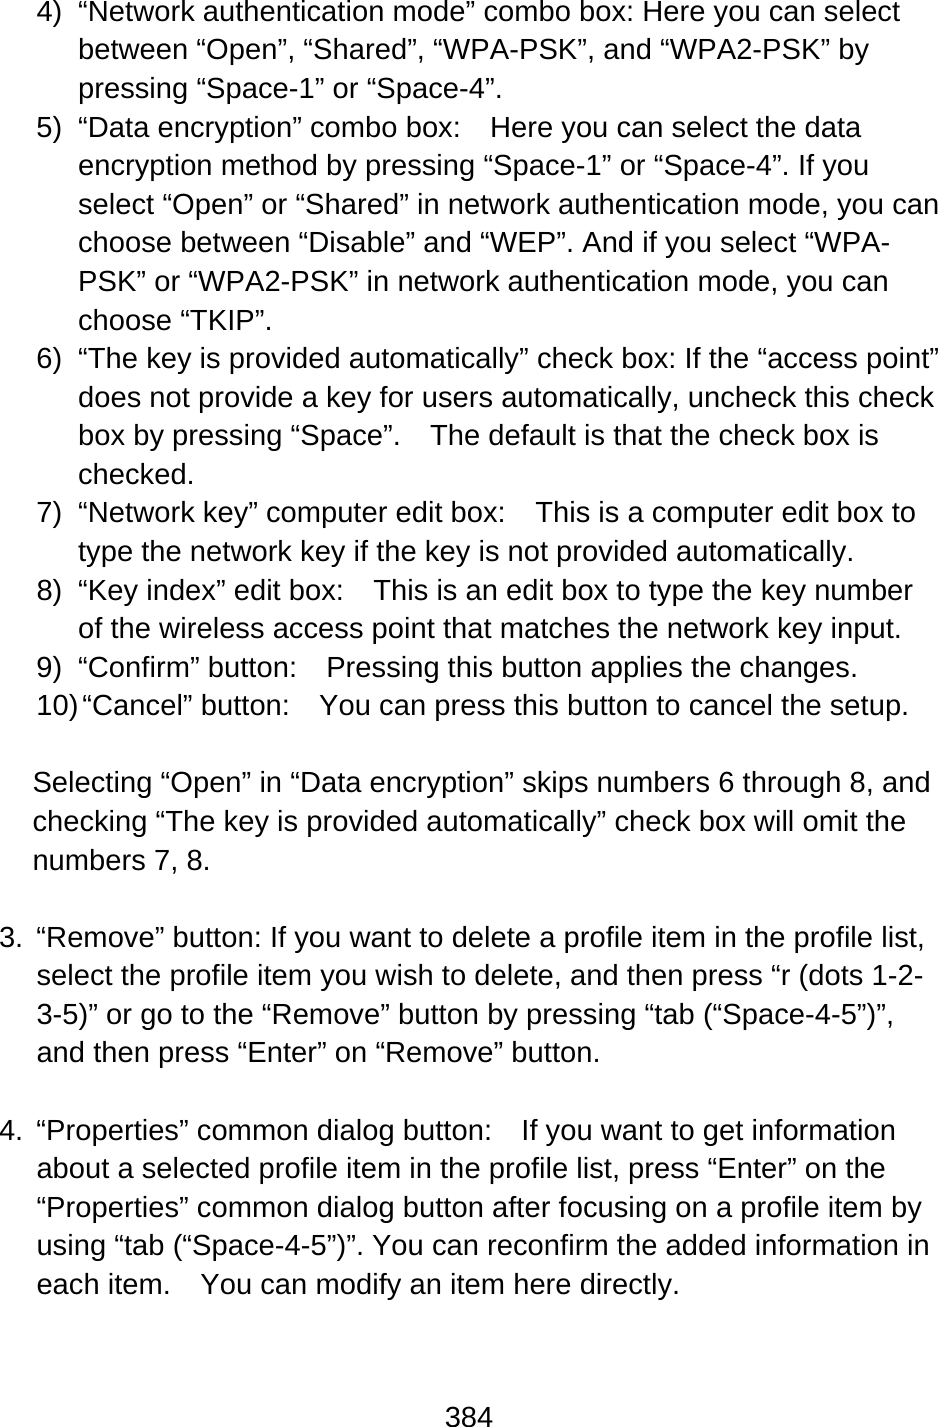 384  4) “Network authentication mode” combo box: Here you can select between “Open”, “Shared”, “WPA-PSK”, and “WPA2-PSK” by pressing “Space-1” or “Space-4”. 5)  “Data encryption” combo box:    Here you can select the data encryption method by pressing “Space-1” or “Space-4”. If you select “Open” or “Shared” in network authentication mode, you can choose between “Disable” and “WEP”. And if you select “WPA-PSK” or “WPA2-PSK” in network authentication mode, you can choose “TKIP”. 6)  “The key is provided automatically” check box: If the “access point” does not provide a key for users automatically, uncheck this check box by pressing “Space”.    The default is that the check box is checked. 7)  “Network key” computer edit box:    This is a computer edit box to type the network key if the key is not provided automatically. 8)  “Key index” edit box:    This is an edit box to type the key number of the wireless access point that matches the network key input. 9) “Confirm” button:  Pressing this button applies the changes. 10) “Cancel” button:    You can press this button to cancel the setup.  Selecting “Open” in “Data encryption” skips numbers 6 through 8, and checking “The key is provided automatically” check box will omit the numbers 7, 8.  3.  “Remove” button: If you want to delete a profile item in the profile list, select the profile item you wish to delete, and then press “r (dots 1-2-3-5)” or go to the “Remove” button by pressing “tab (“Space-4-5”)”, and then press “Enter” on “Remove” button.  4.  “Properties” common dialog button:    If you want to get information about a selected profile item in the profile list, press “Enter” on the “Properties” common dialog button after focusing on a profile item by using “tab (“Space-4-5”)”. You can reconfirm the added information in each item.    You can modify an item here directly.  